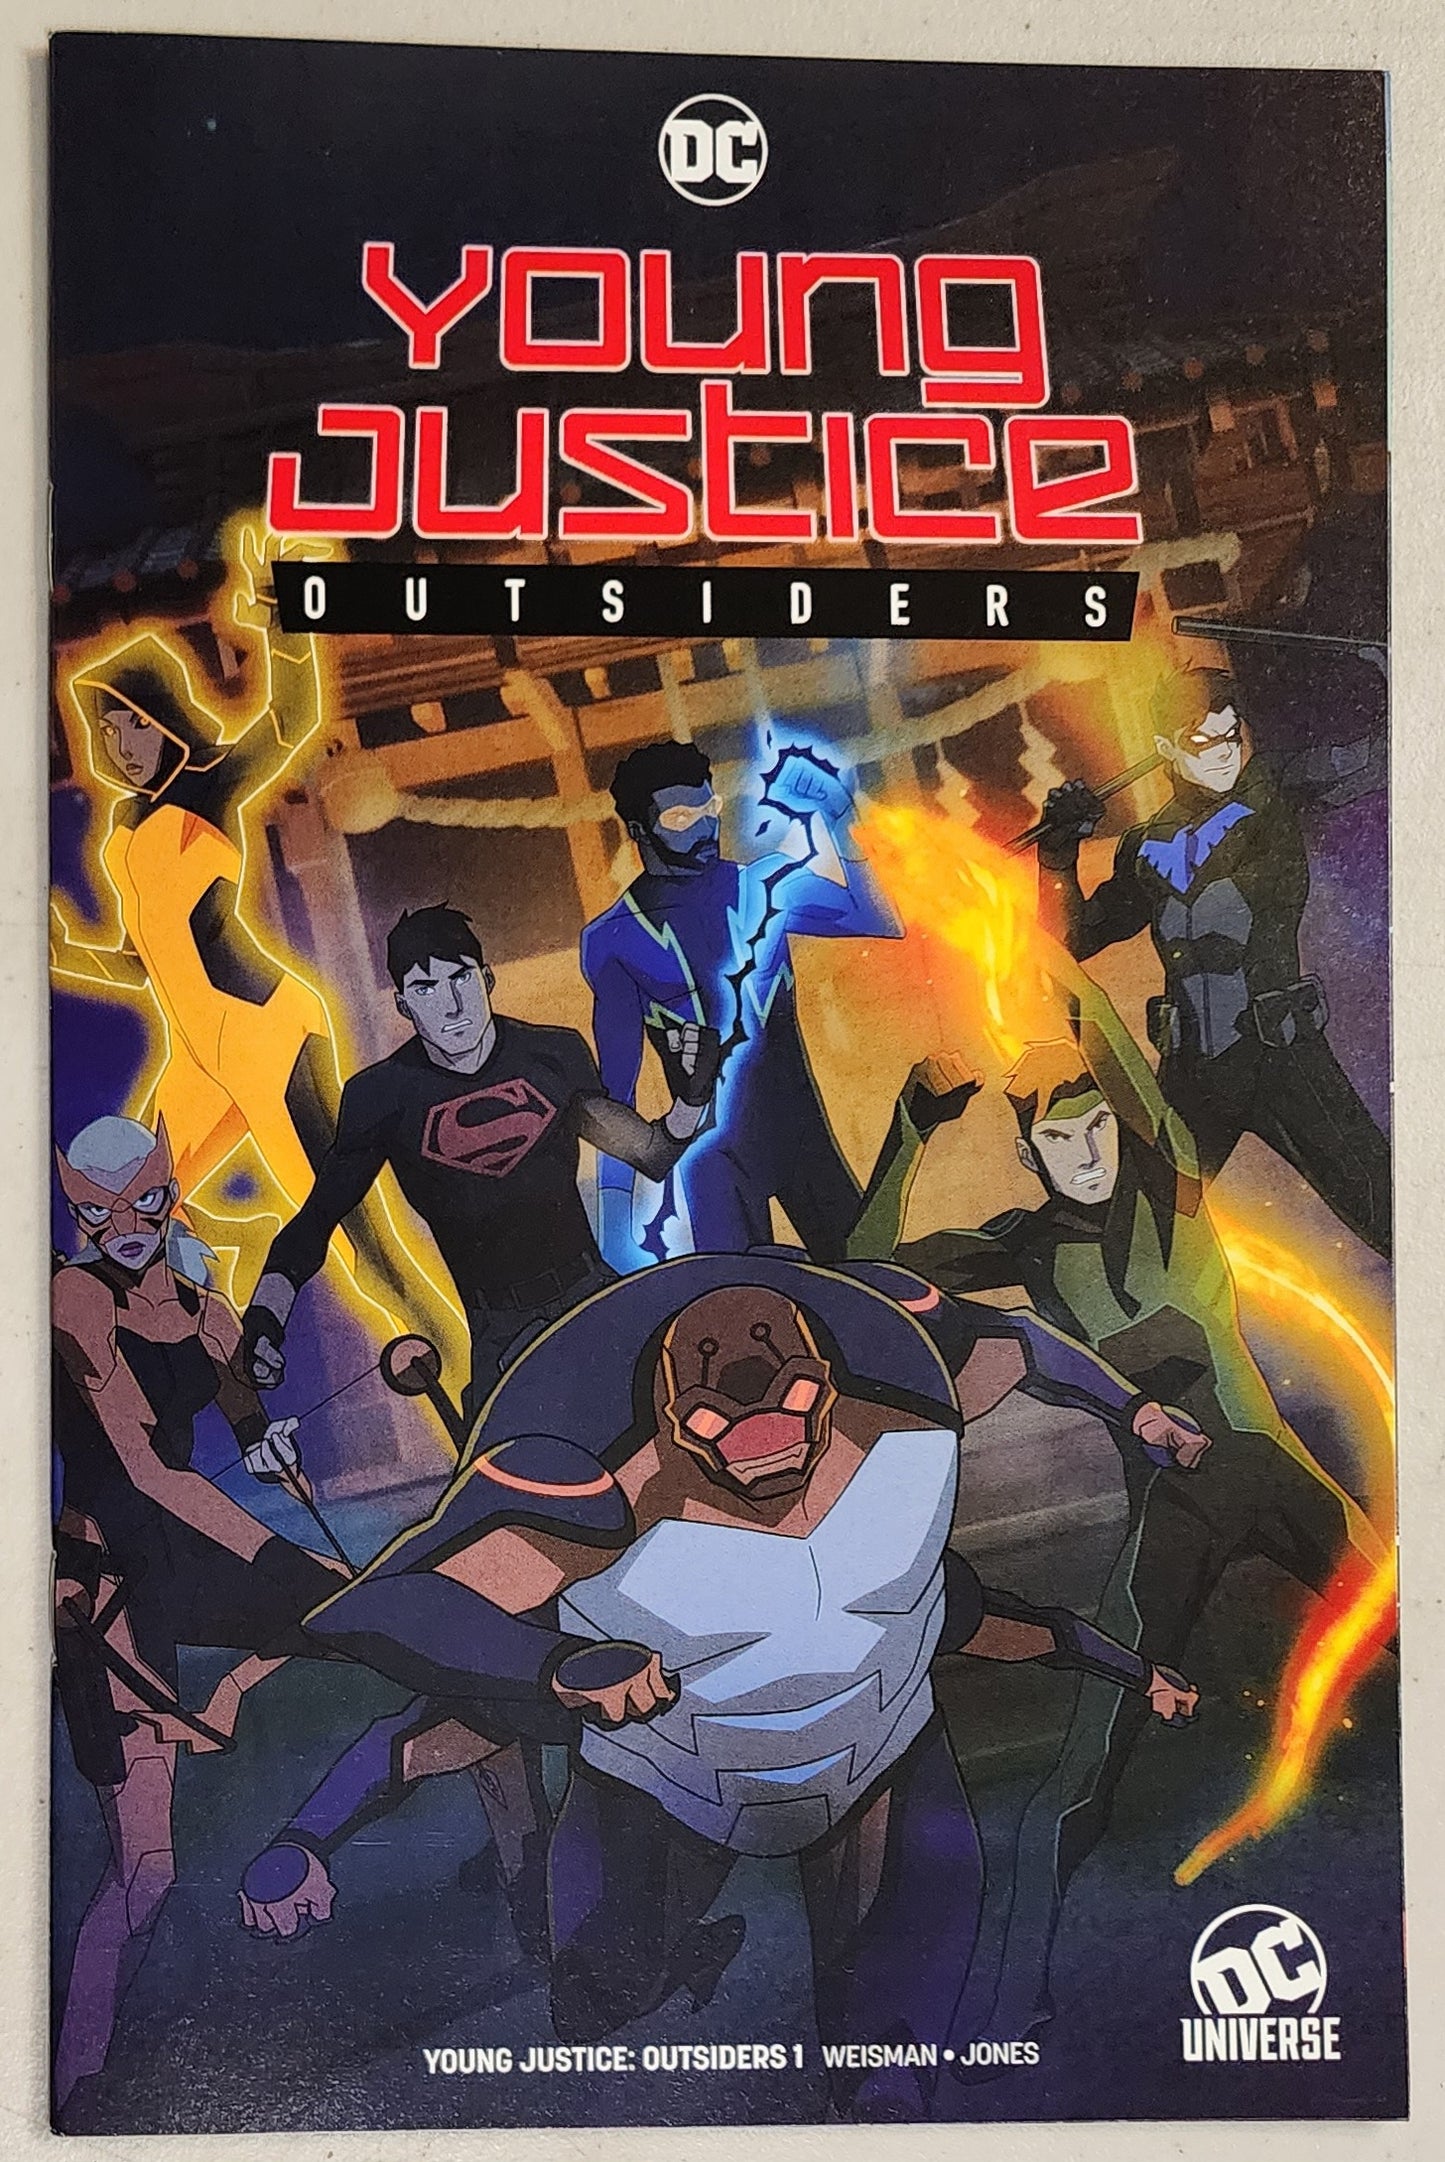 YOUNG JUSTICE OUTSIDERS #1 SDCC DC UNIVERSE VARIANT 2019